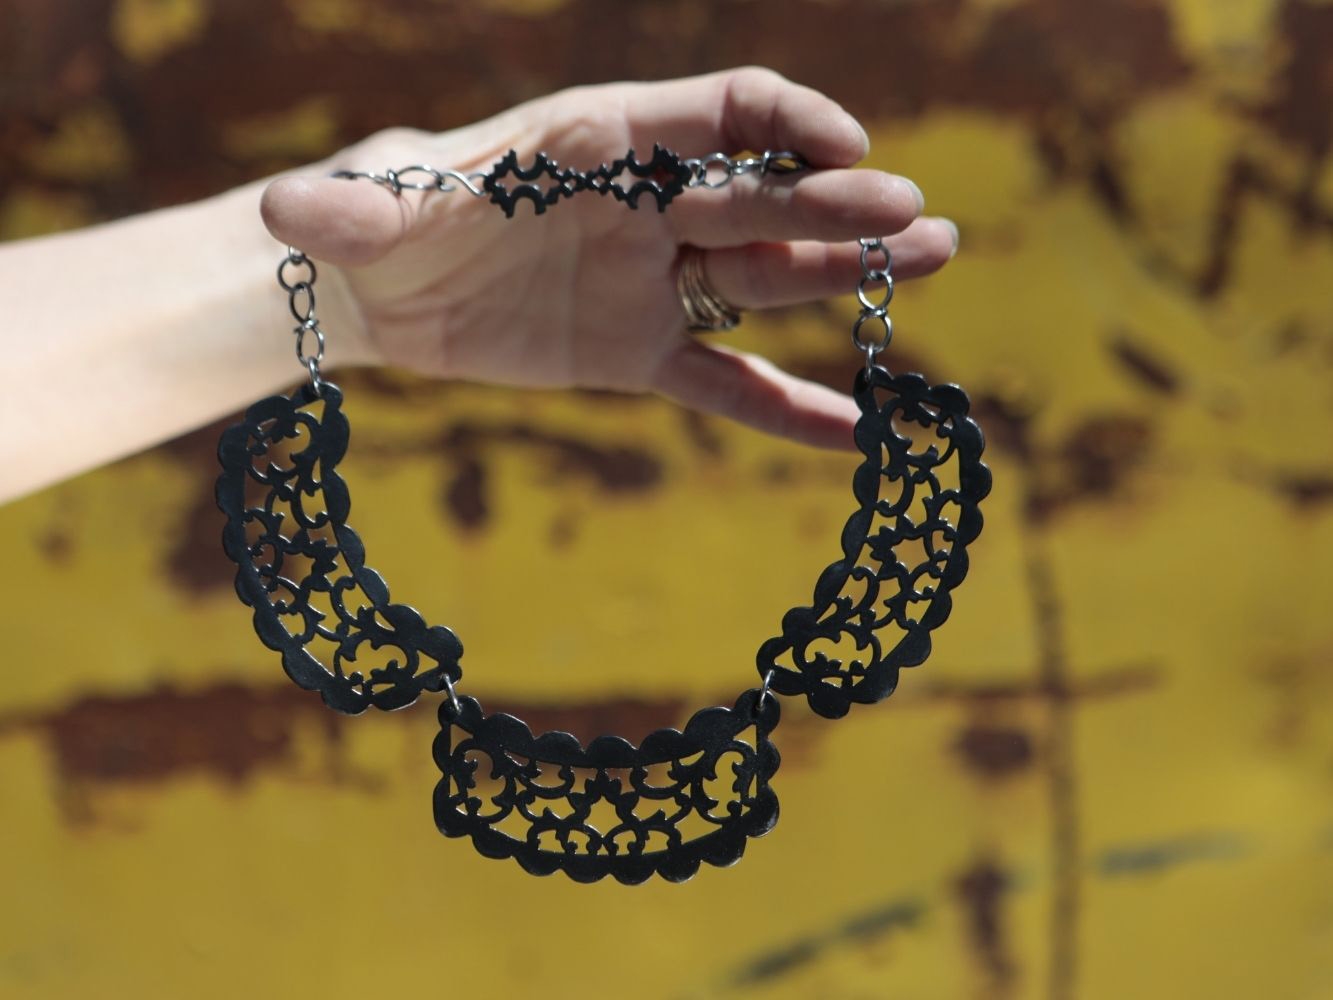 Intricately designed handmade necklace held up by hand